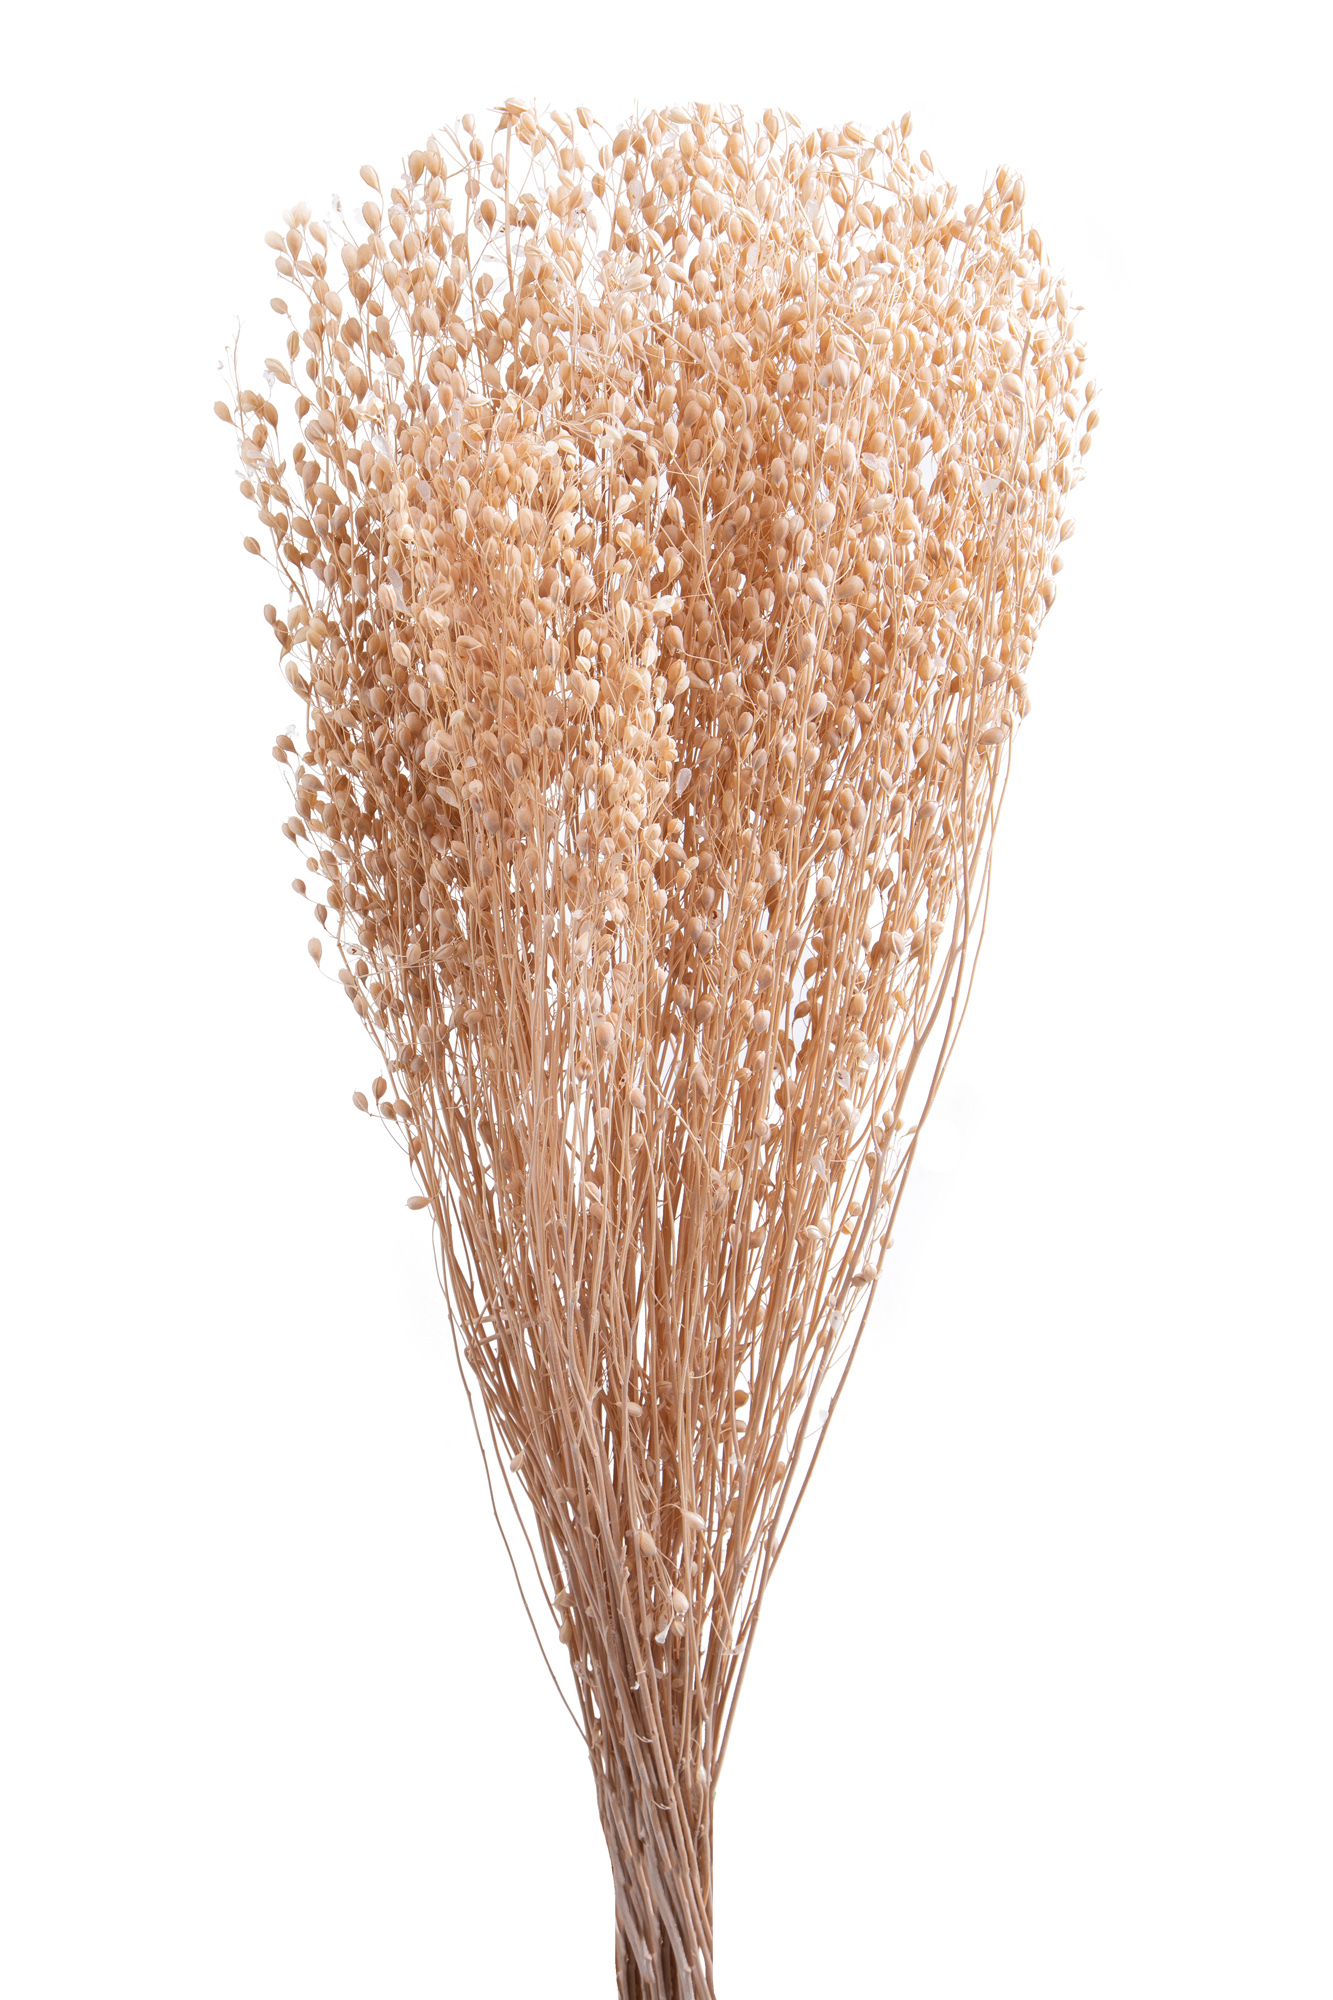 NATURAL PRODUCTS DRIED FLOWERS AND ERBS,COLORED GRASS AND FLOWERS,LEPIDIUM ATRAXA SBIANCATO 100 GR